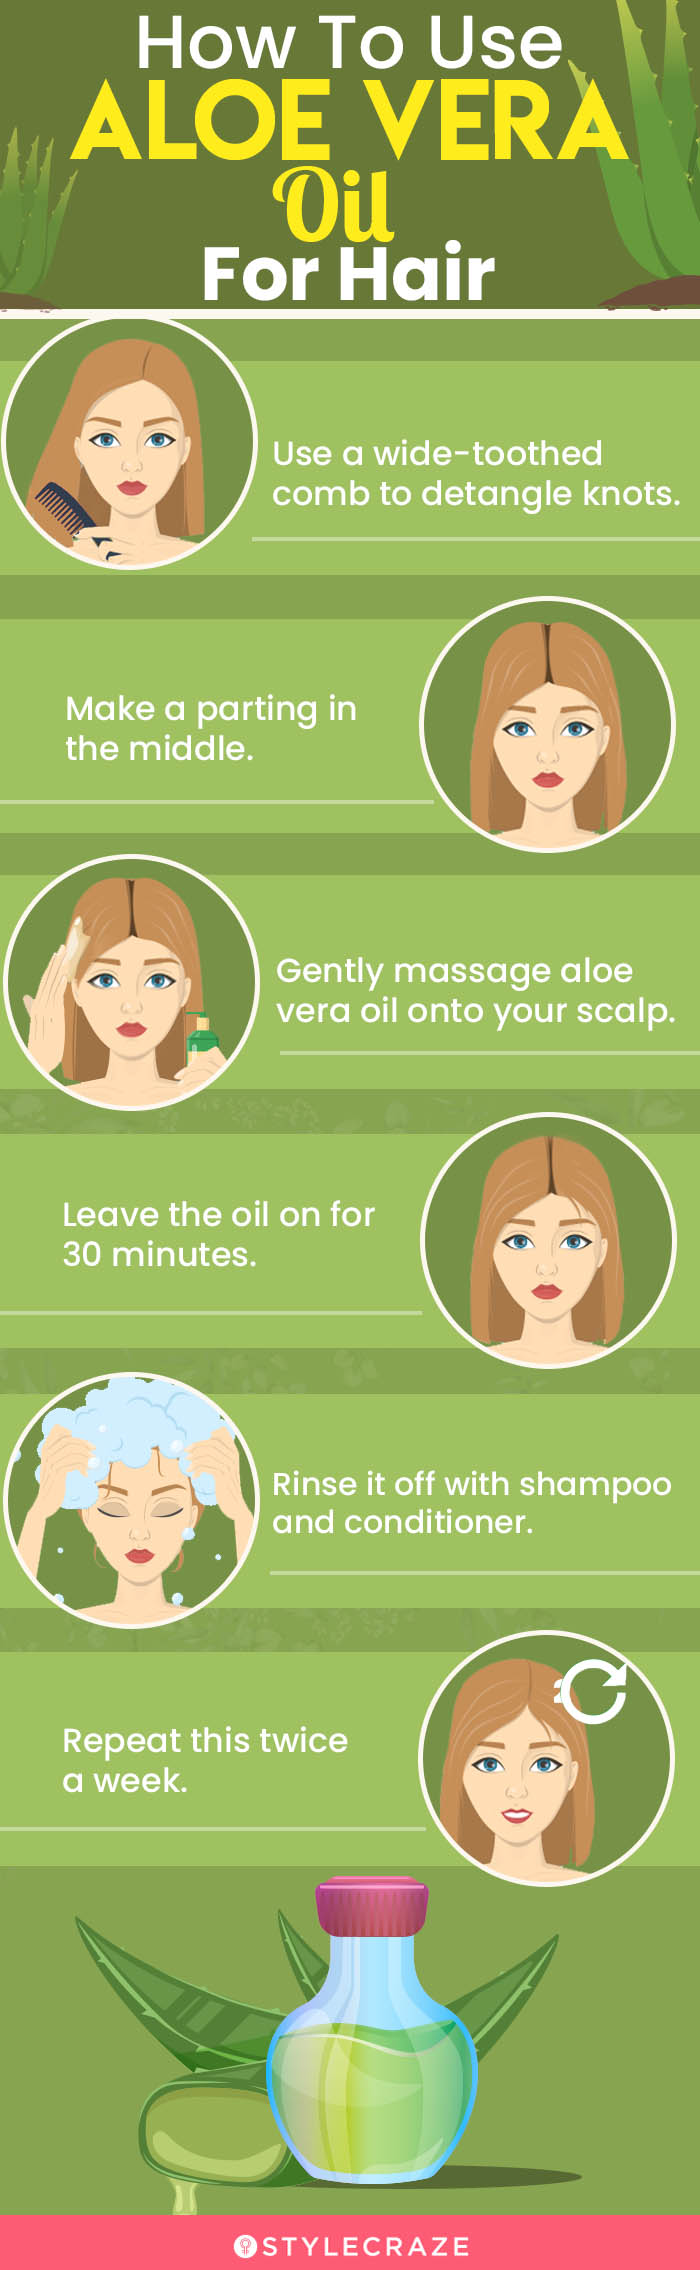 how to use aloe vera oil for hair [infographic]